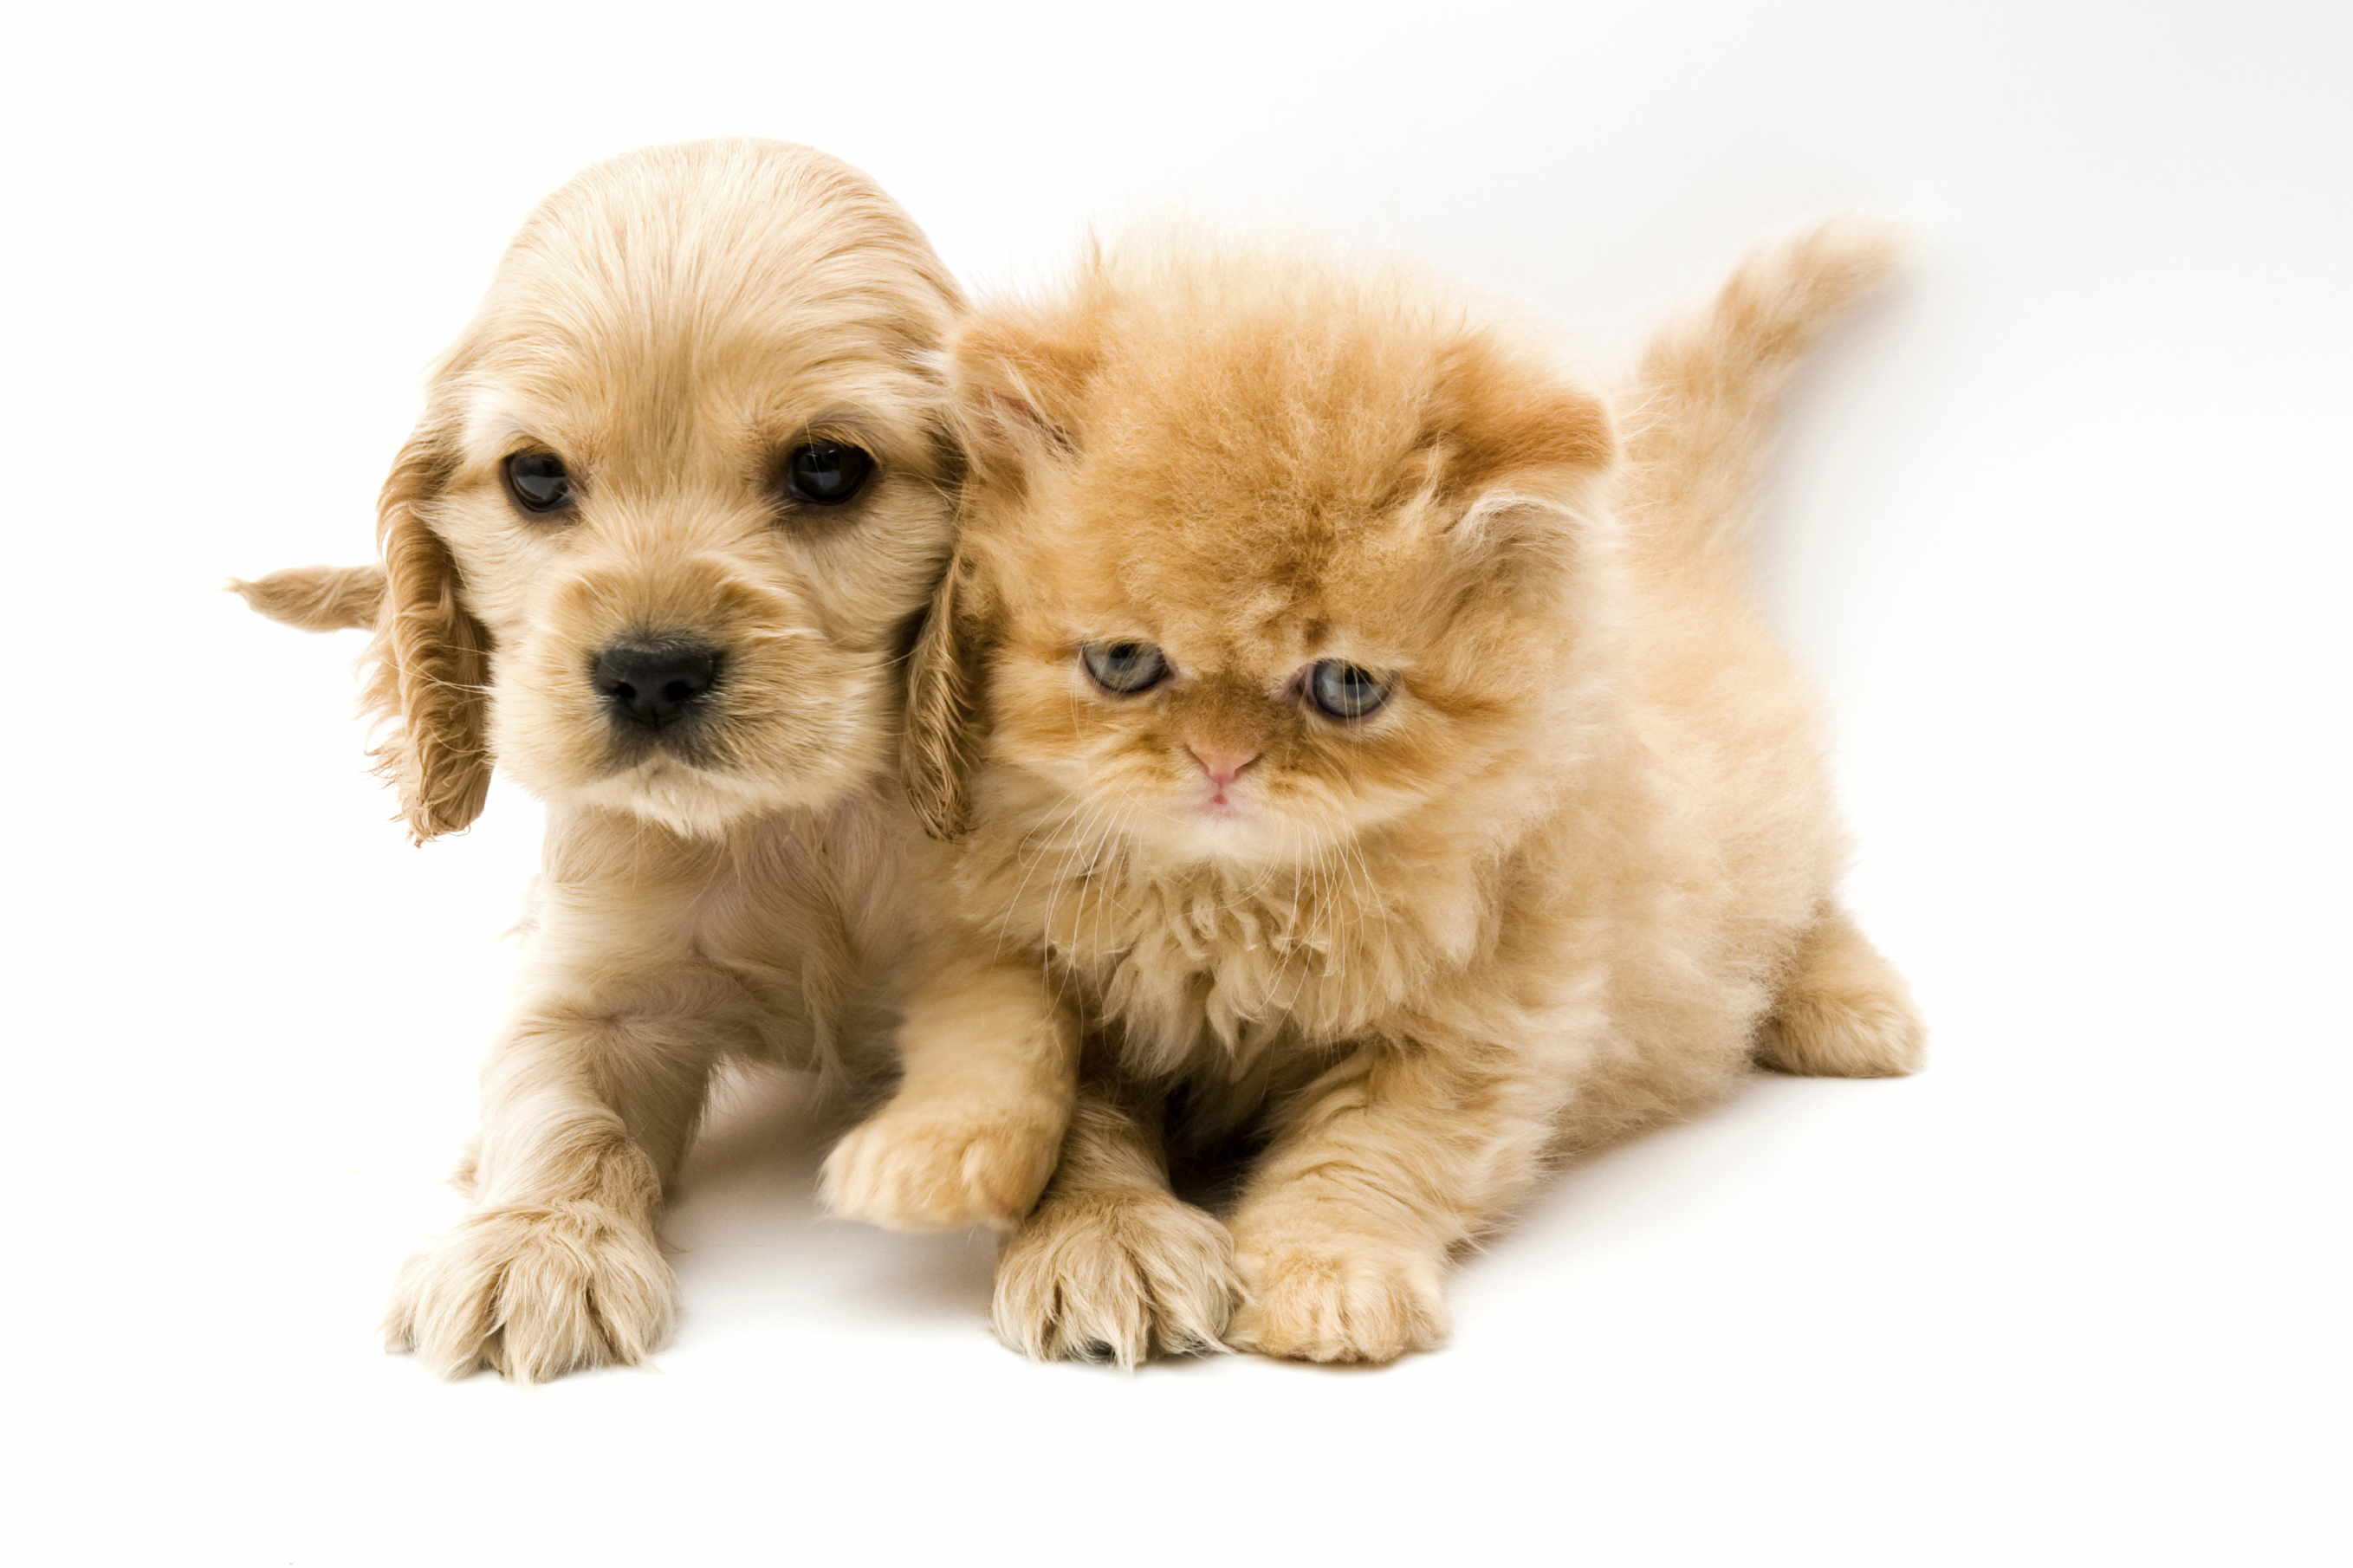 Cat And Dog Wallpaper High Quality